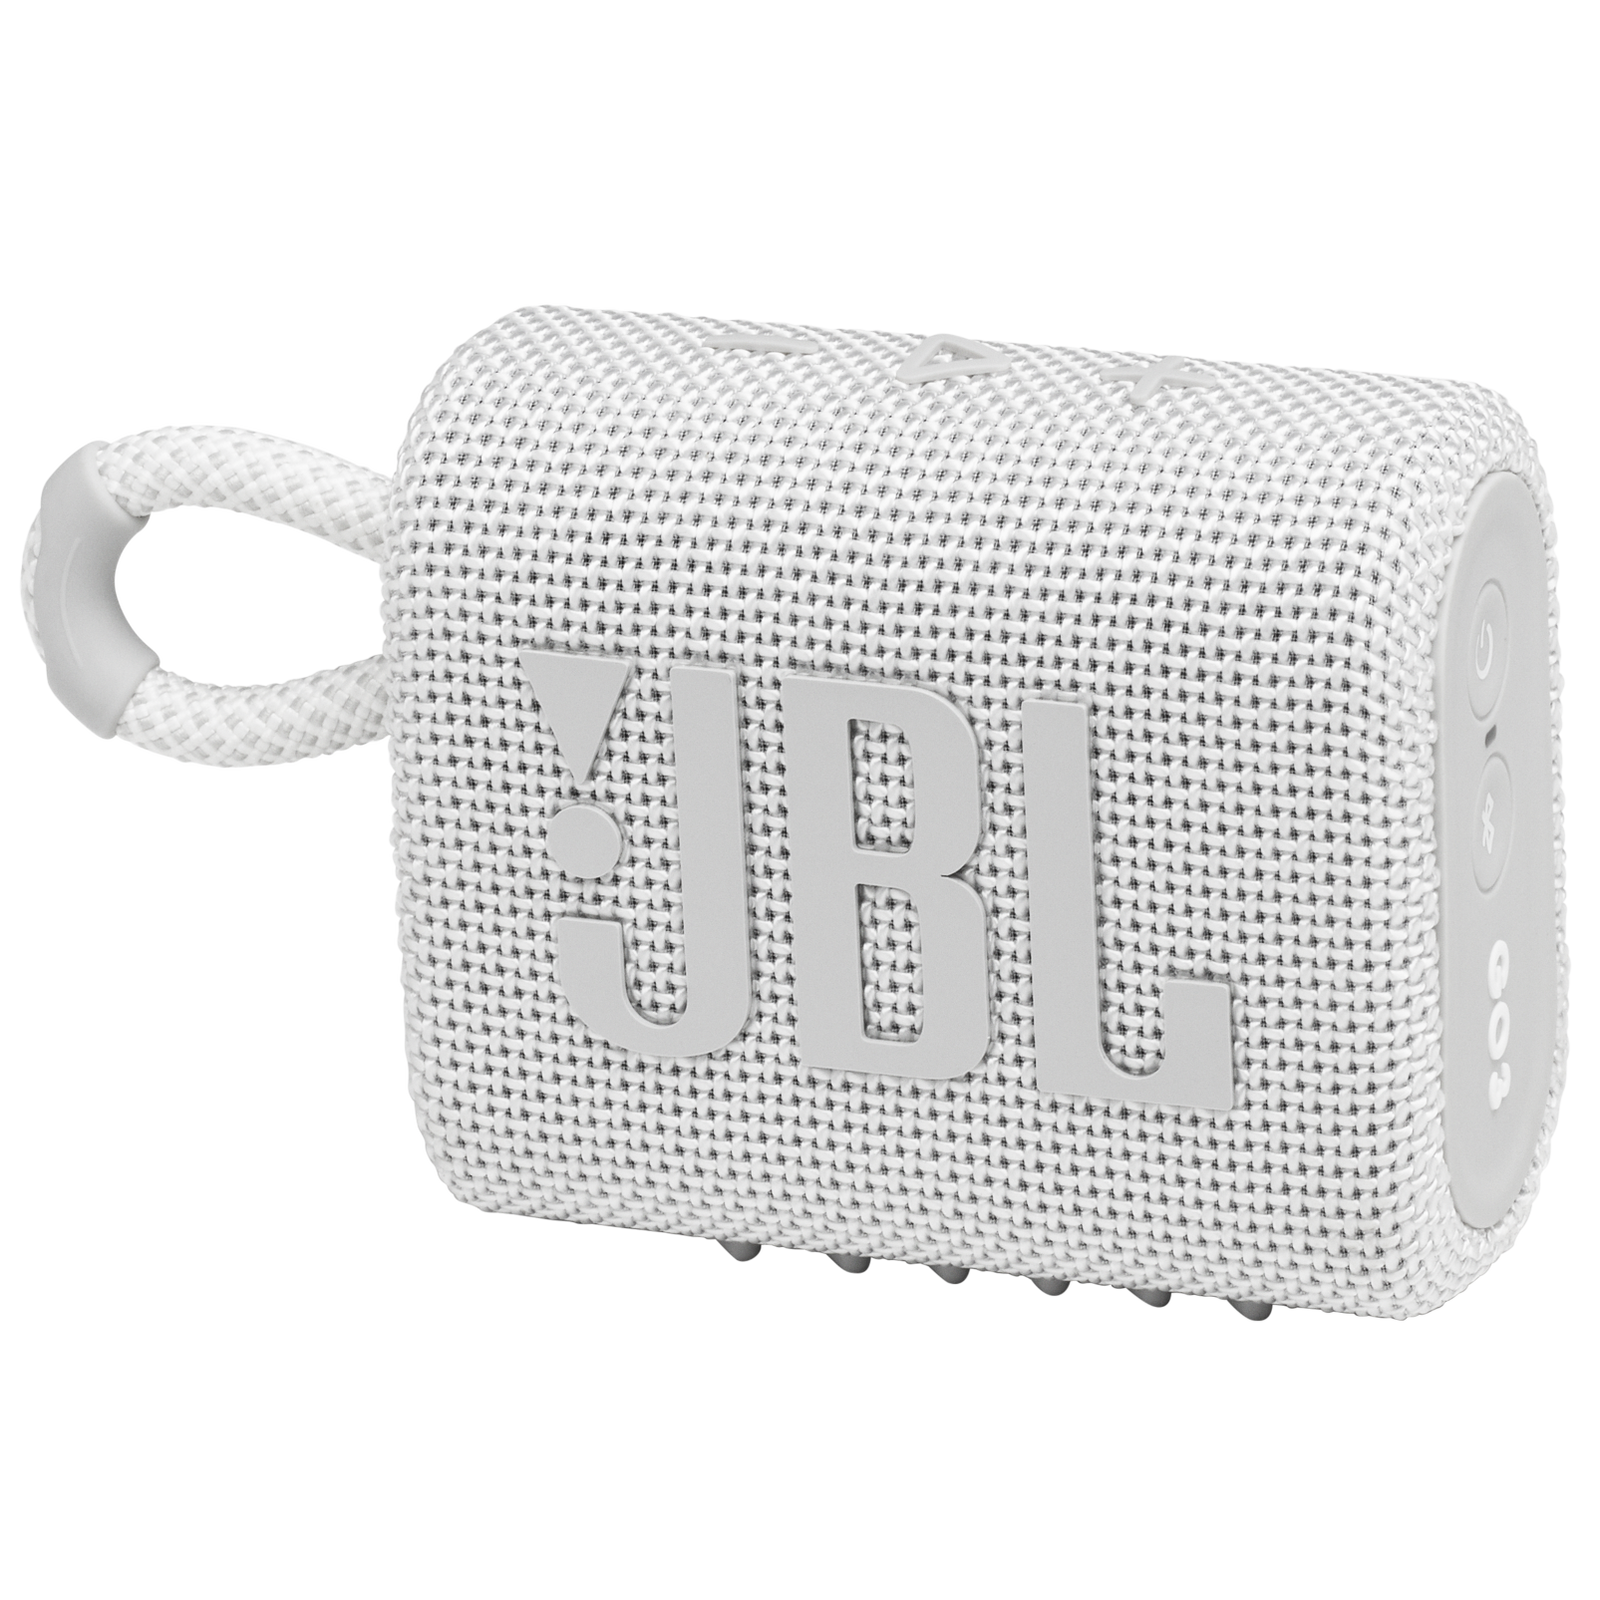 JBL Go 3 Personalized